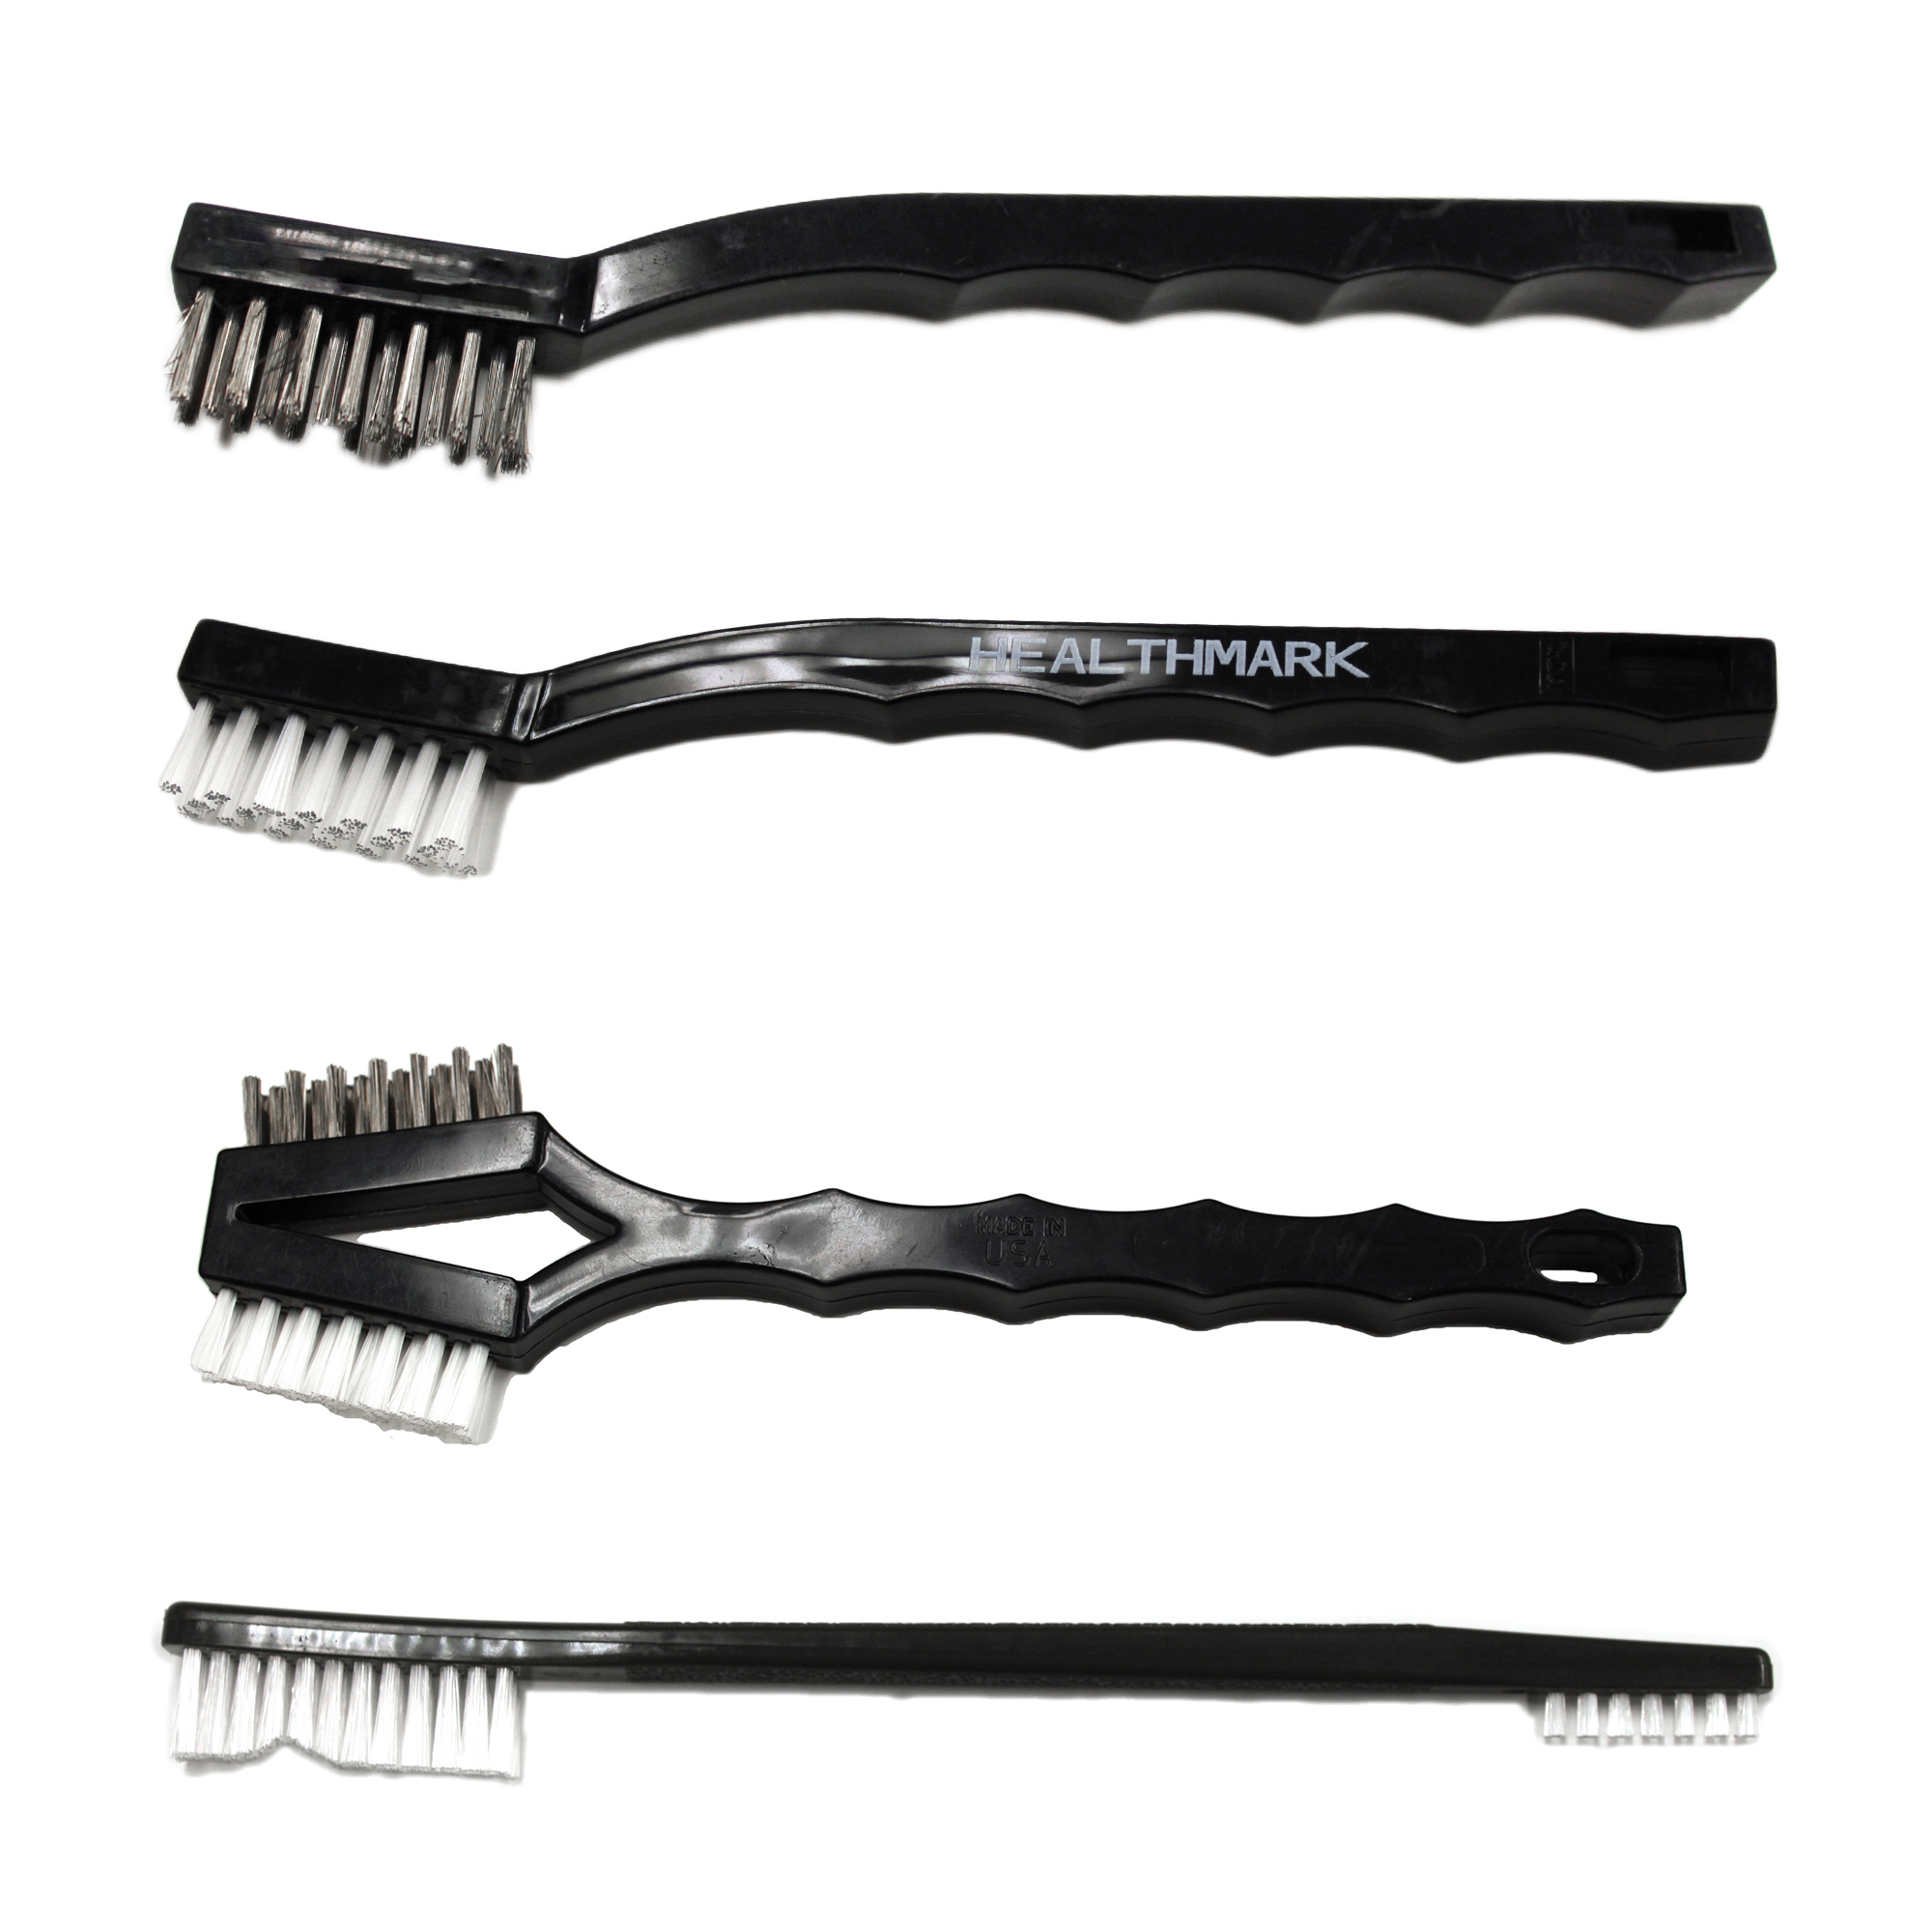 Toothbrush-Style General Instrument Cleaning Brushes